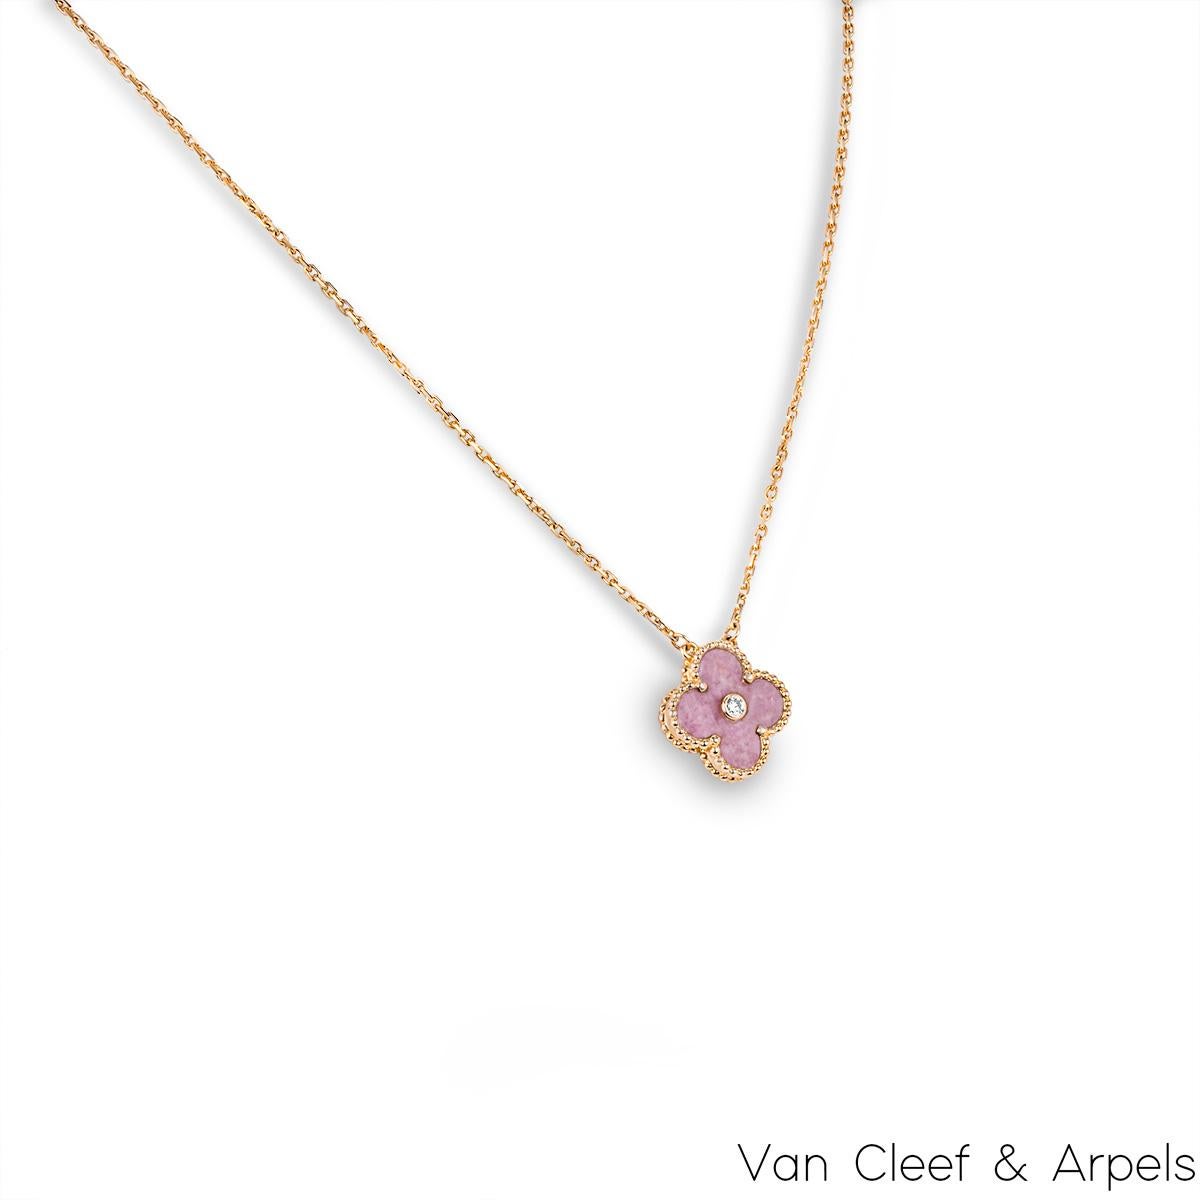 A limited edition 18k rose gold rhodonite and diamond Van Cleef & Arpels Vintage Alhambra pendant from the 2021 Holiday collection. The pendant features a beaded edge 4 leaf clover motif with a rhodonite inlay. Further complementing the inlay is a